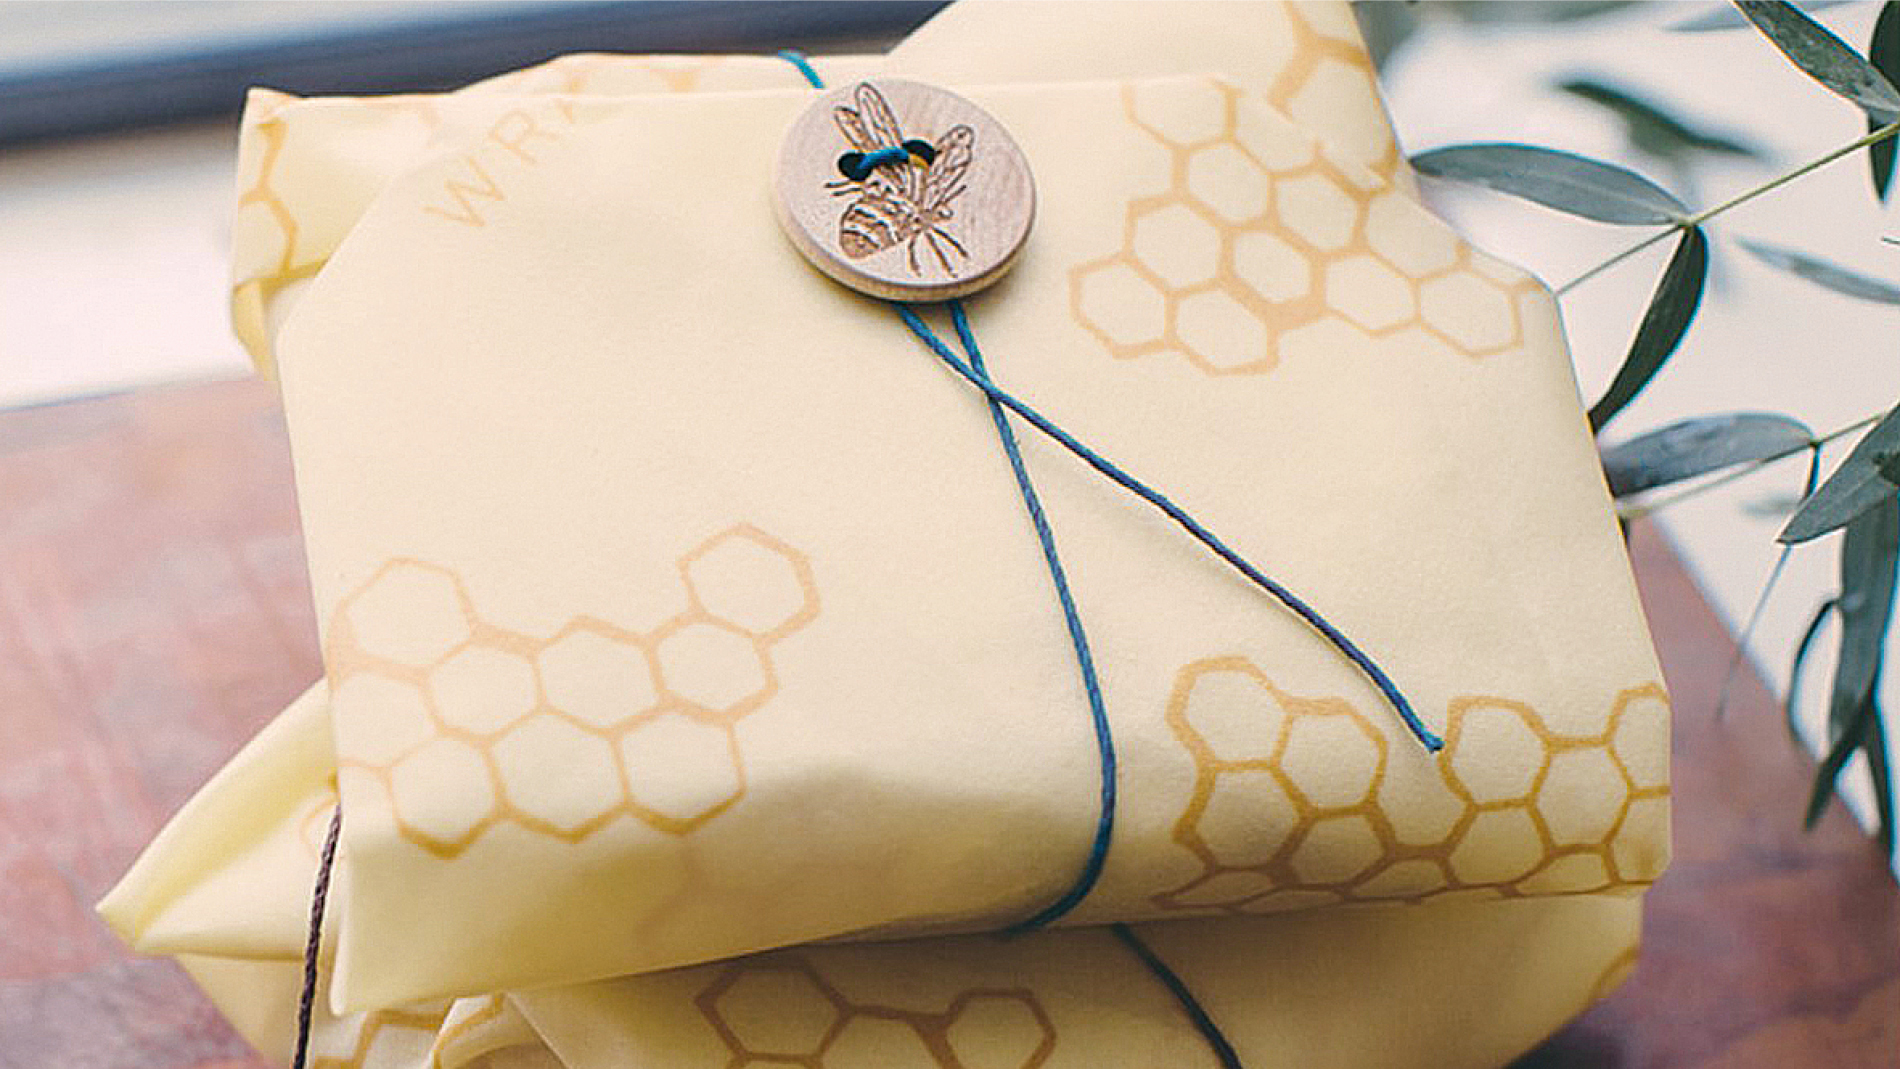 beeswax food wraps from Bee’s Wrap